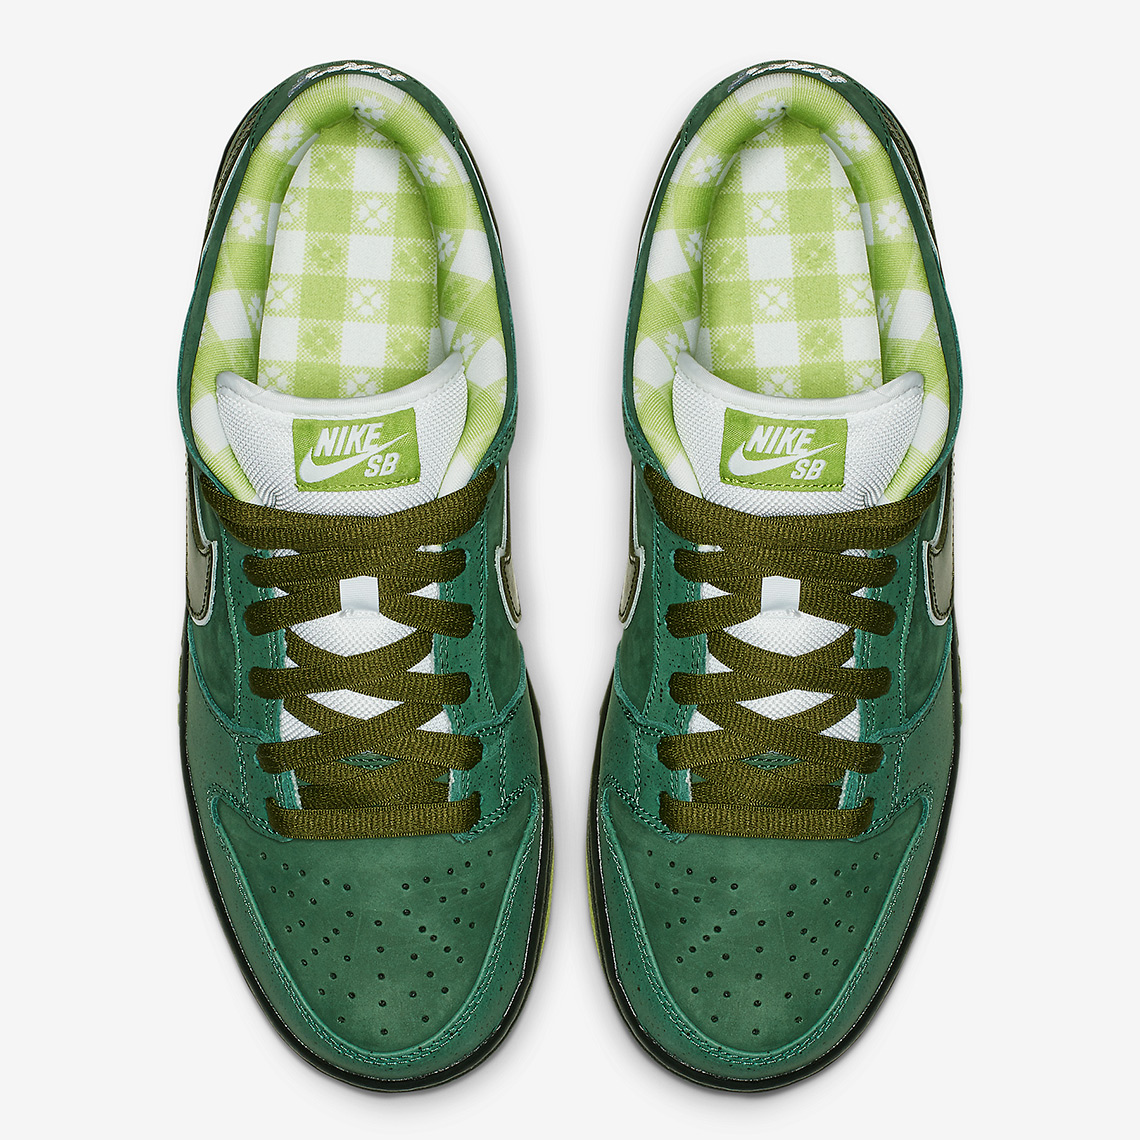 Concepts Nike SB Dunk Low Green Lobster Info | SneakerNews.com